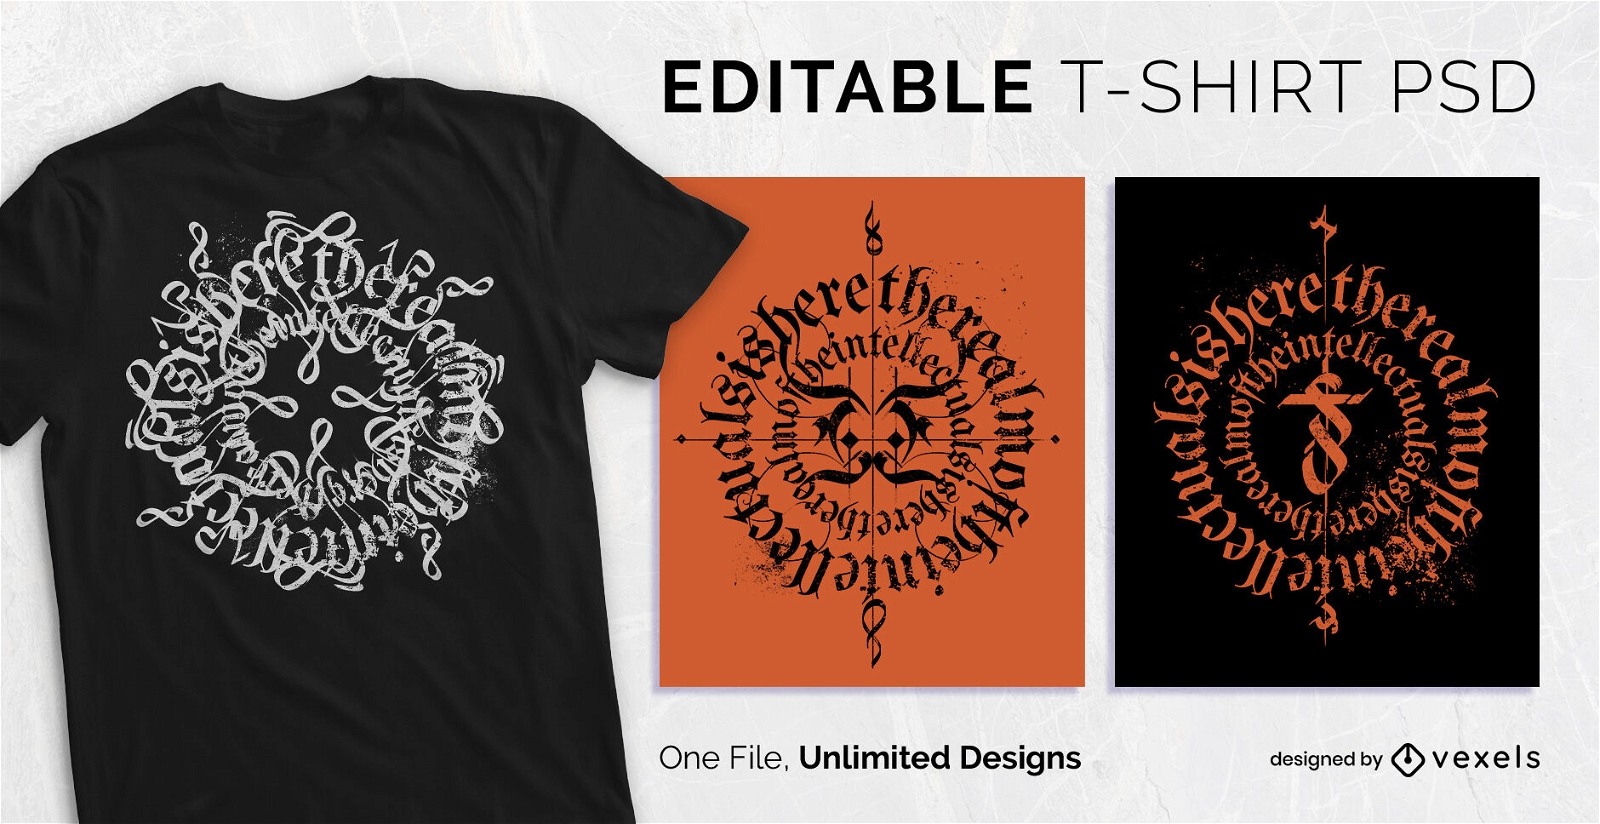 Spiral gothic text scalable t-shirt psd